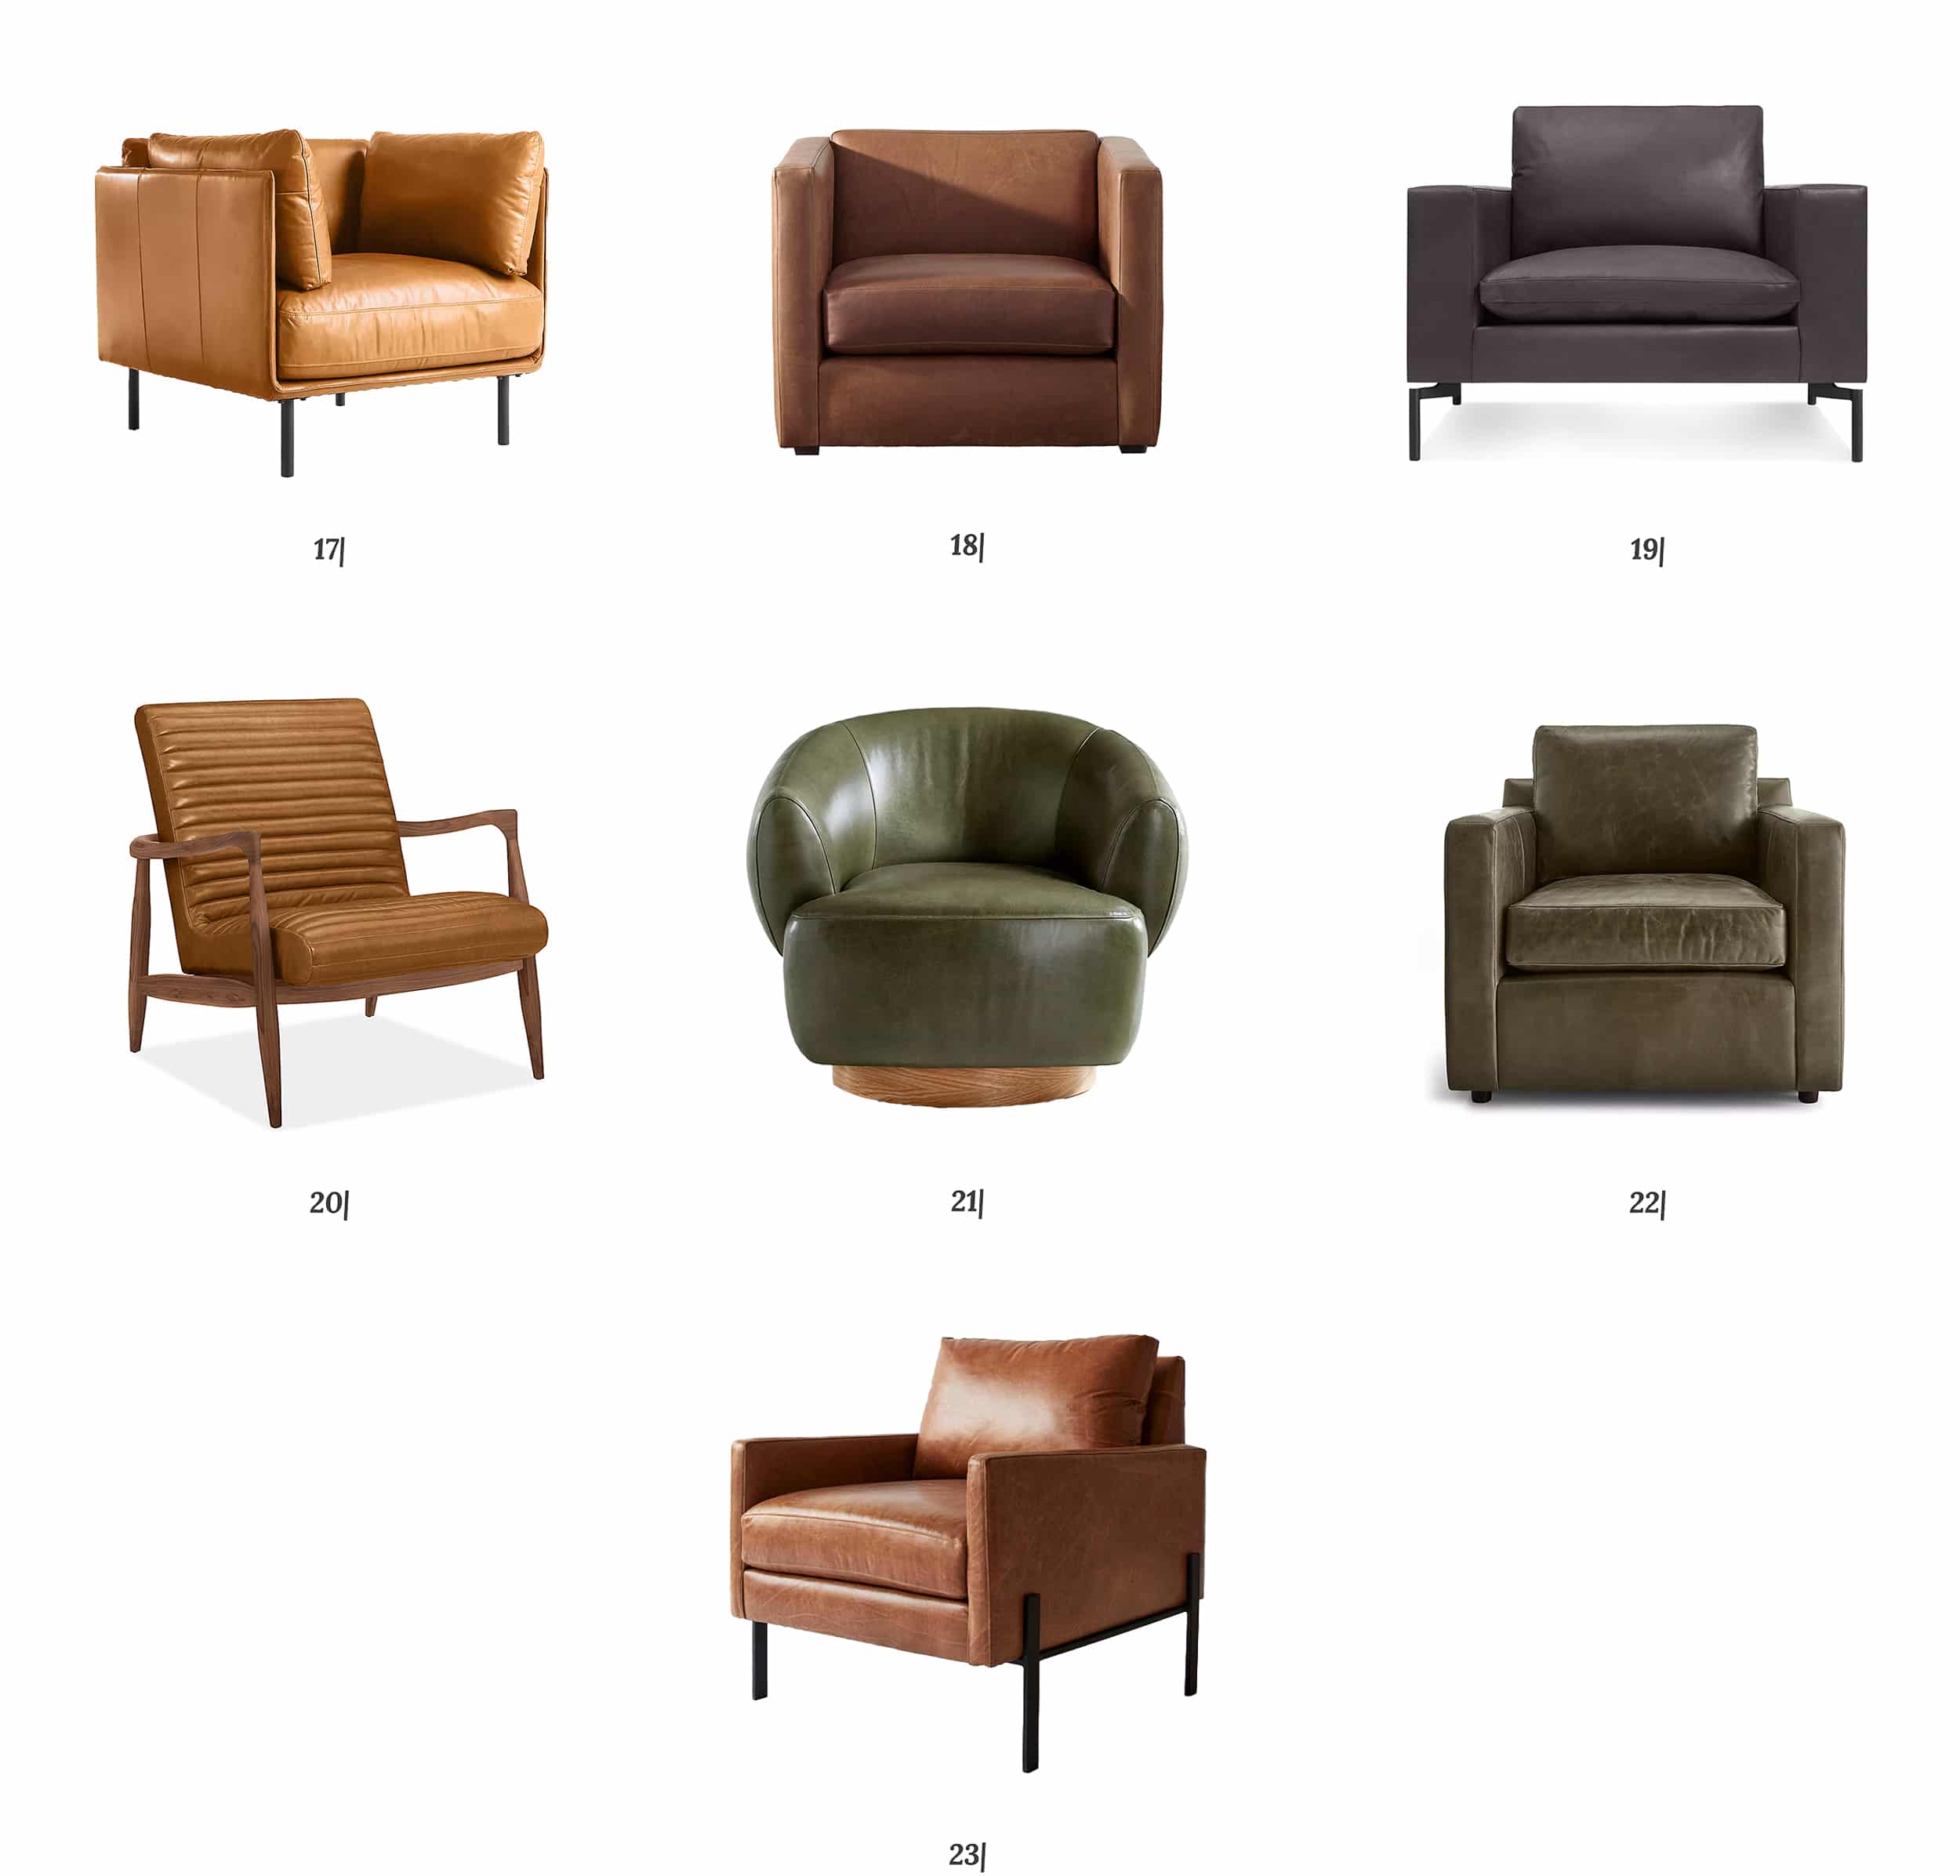 A roundup of 7 leather chairs priced $1500 and up // via Yellow Brick Home